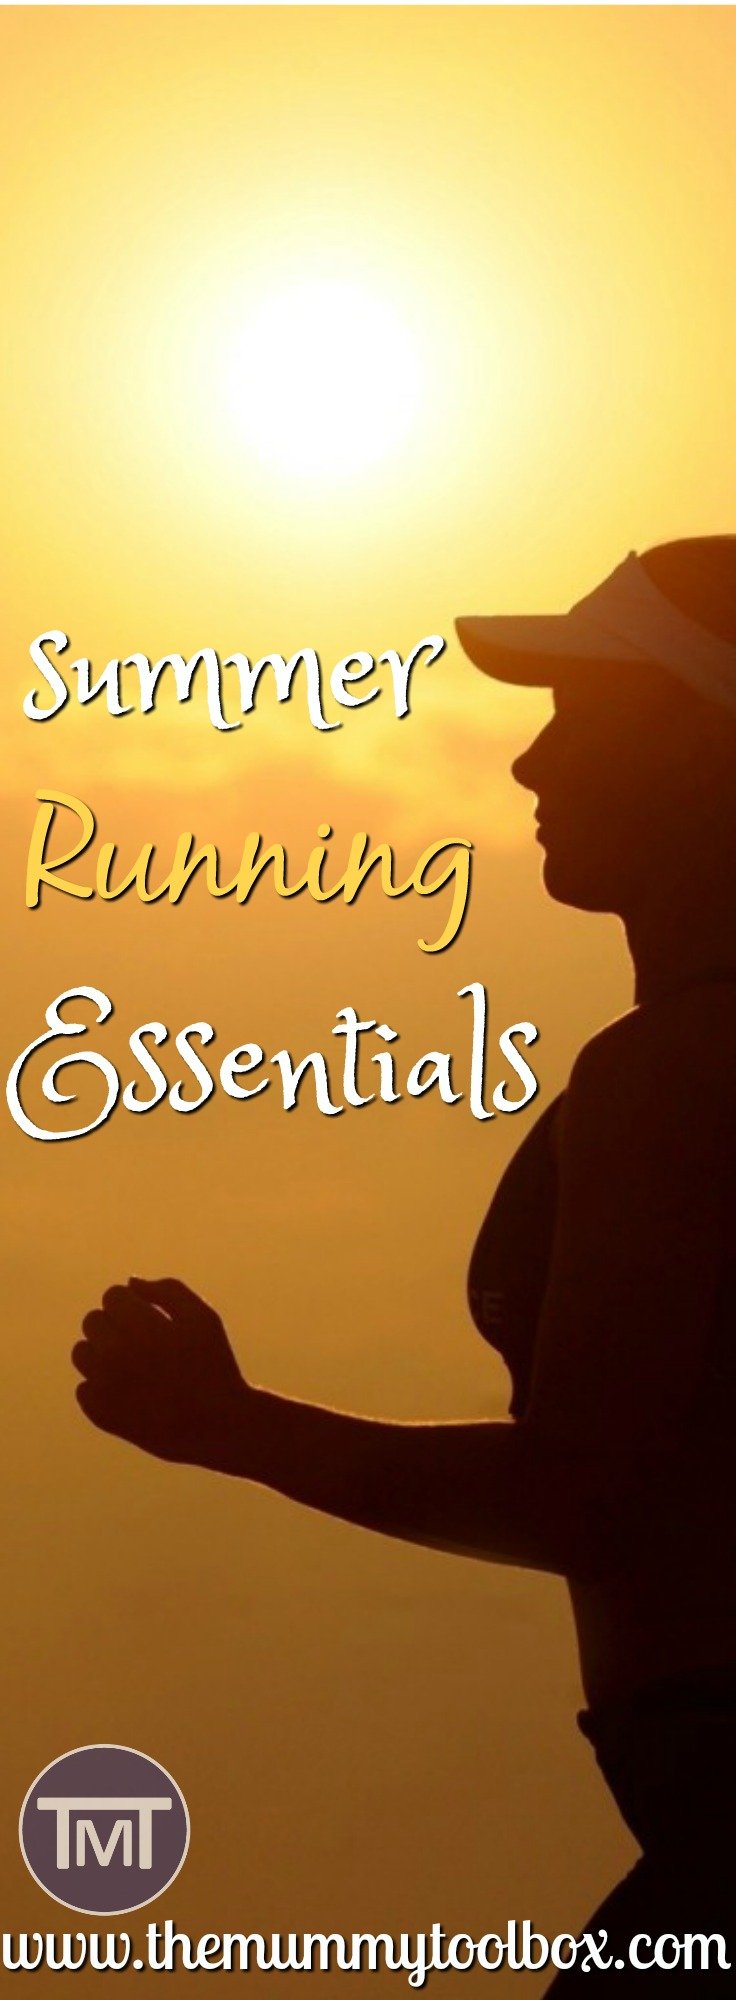 Summer Running Essentials - kit, tips and advice for running in the summer and being able to progress in the heat